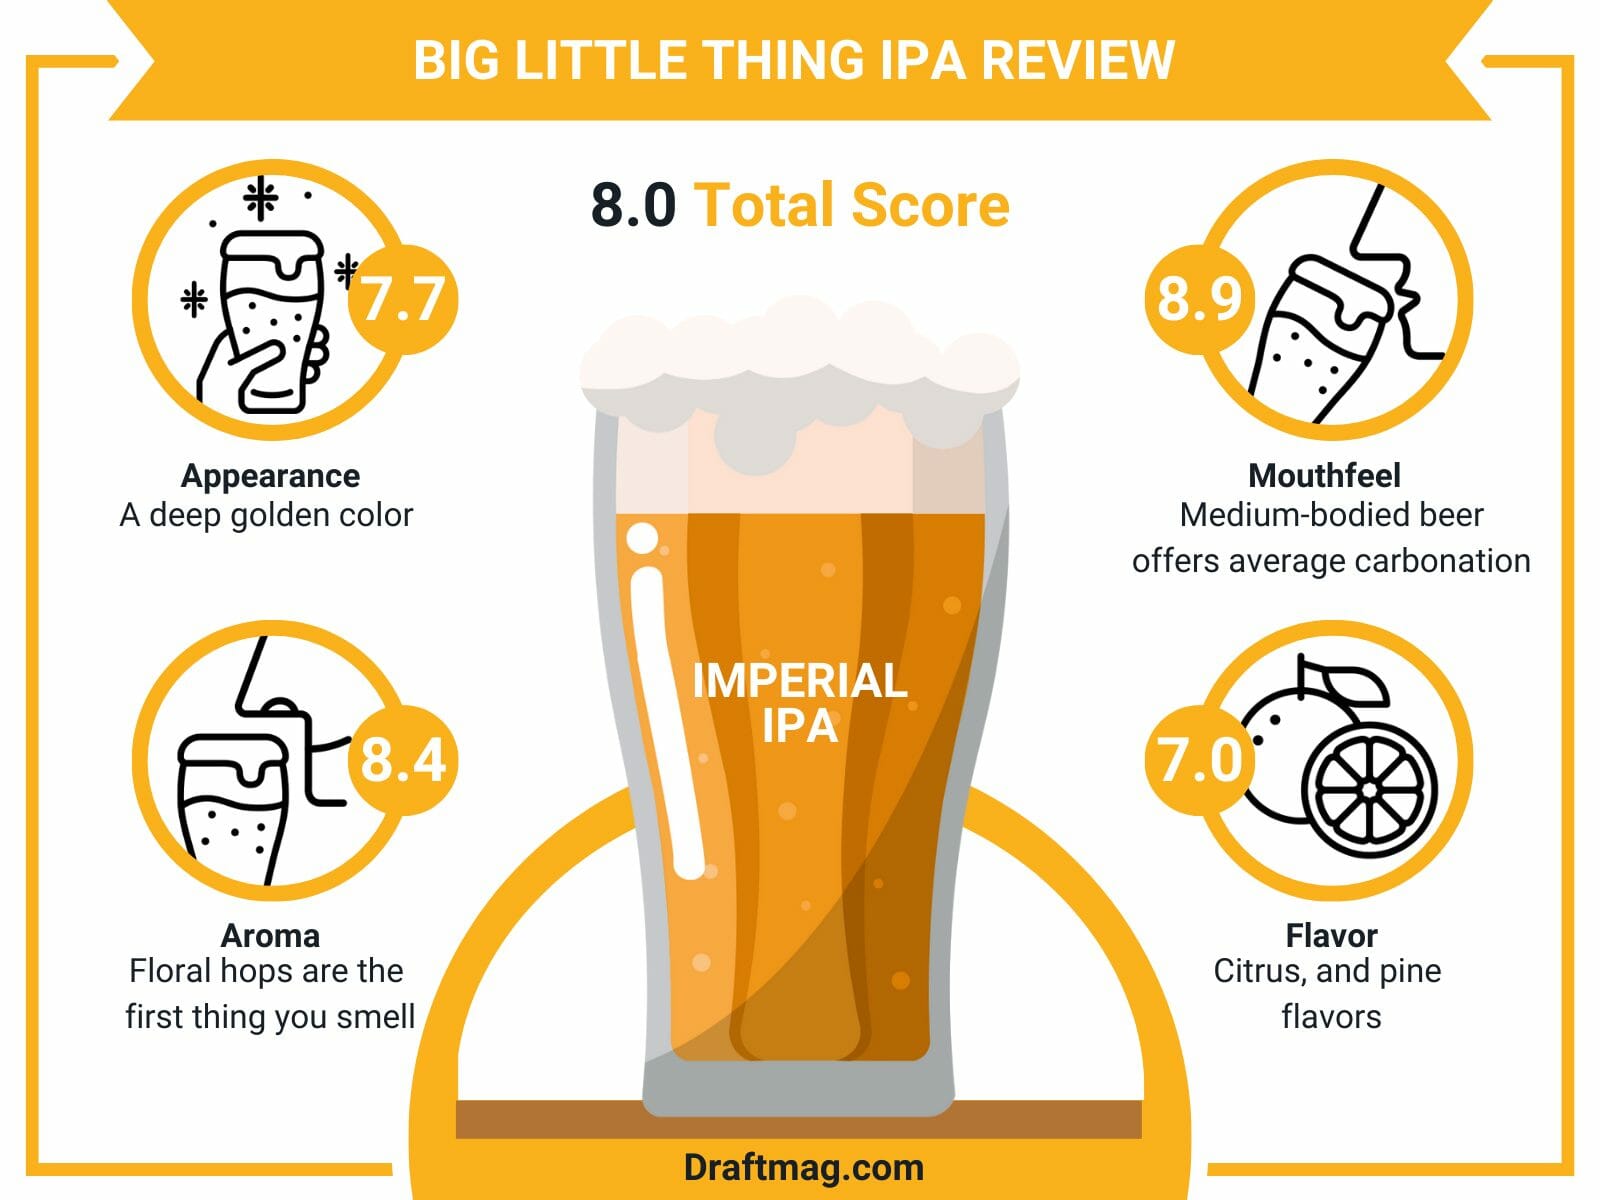 Big little thing ipa review infographic